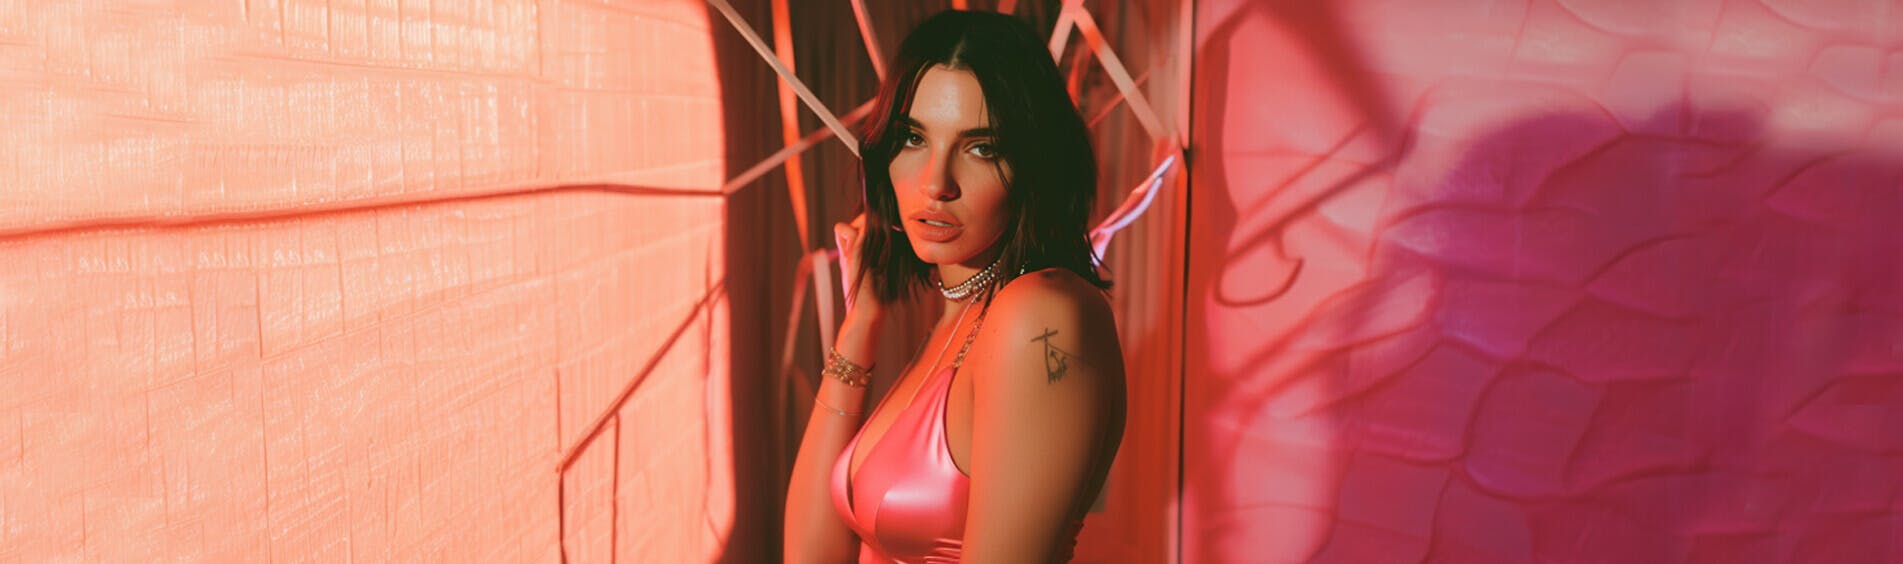 Cover Image for “Radical Optimism” Is About To Release: Dua Lipa Seems Excited